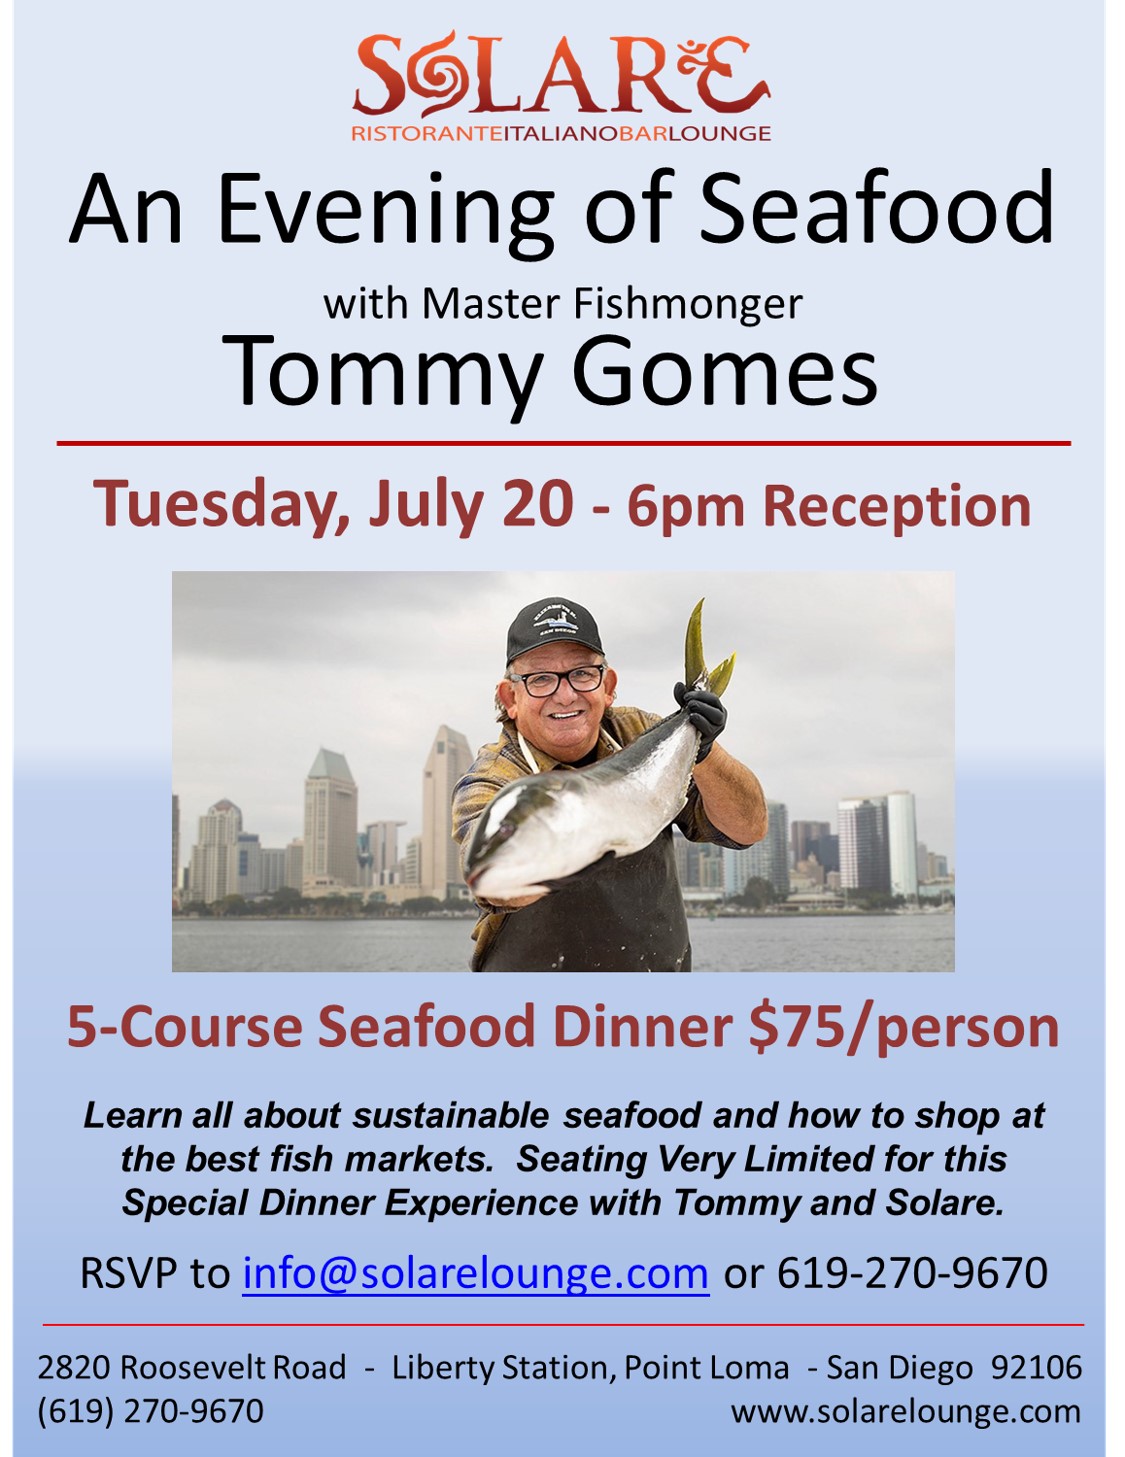 <a id="Solare-Seafood-TommyGomes-Dinner"></a>Tommy Gomes - An Evening of Seafood Night 1